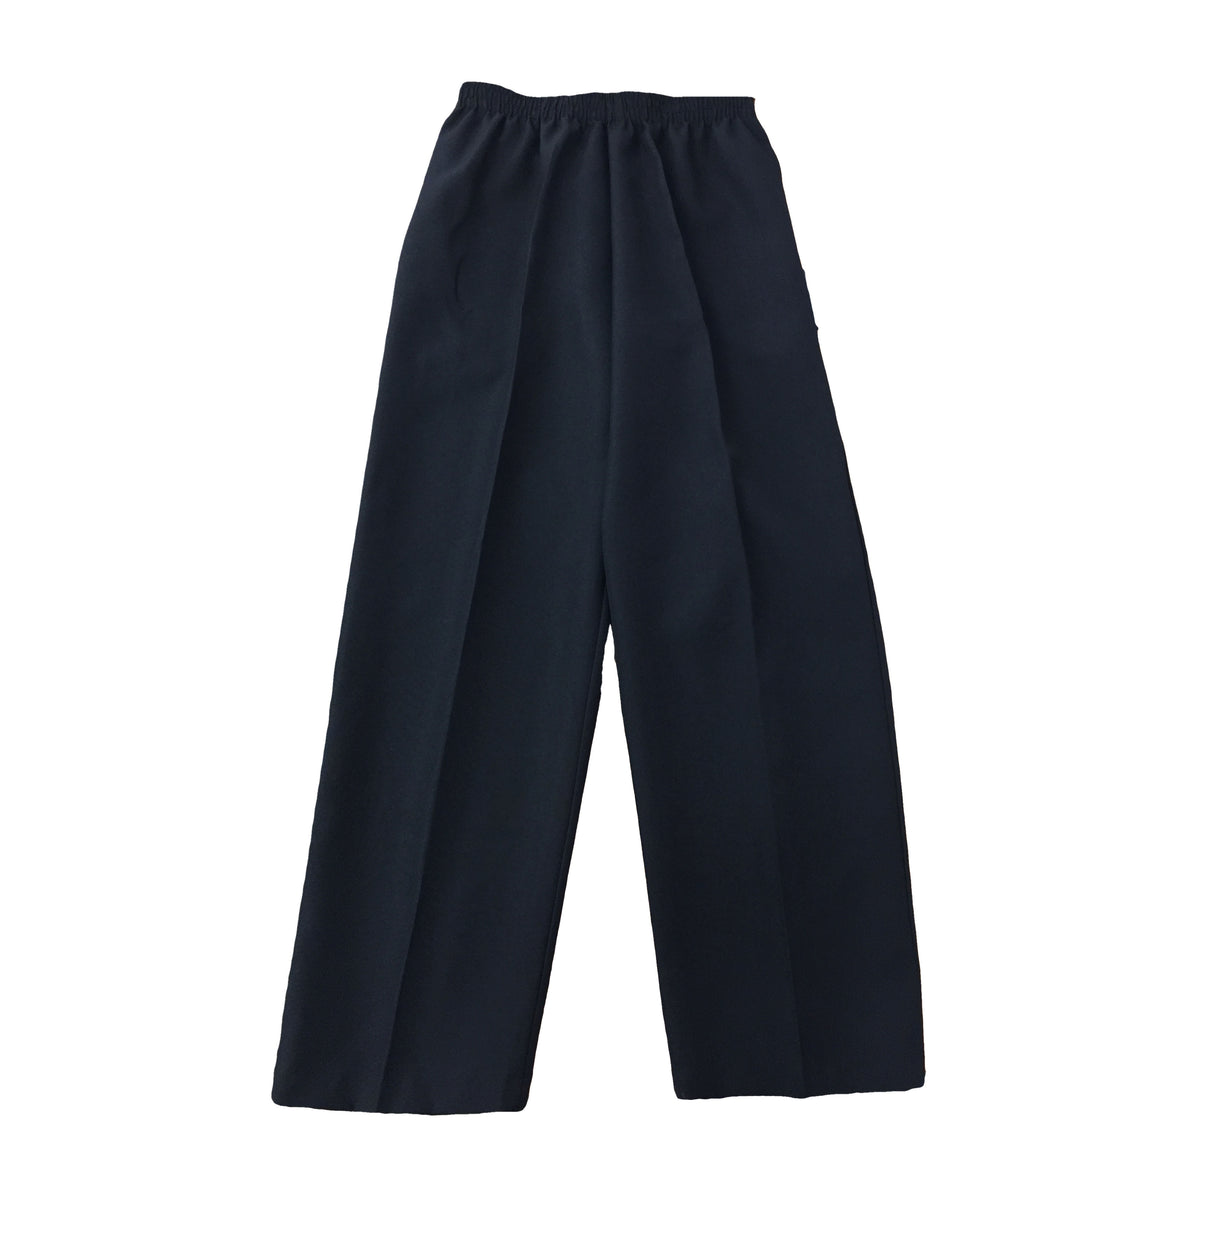 Women's Pants with Pocket